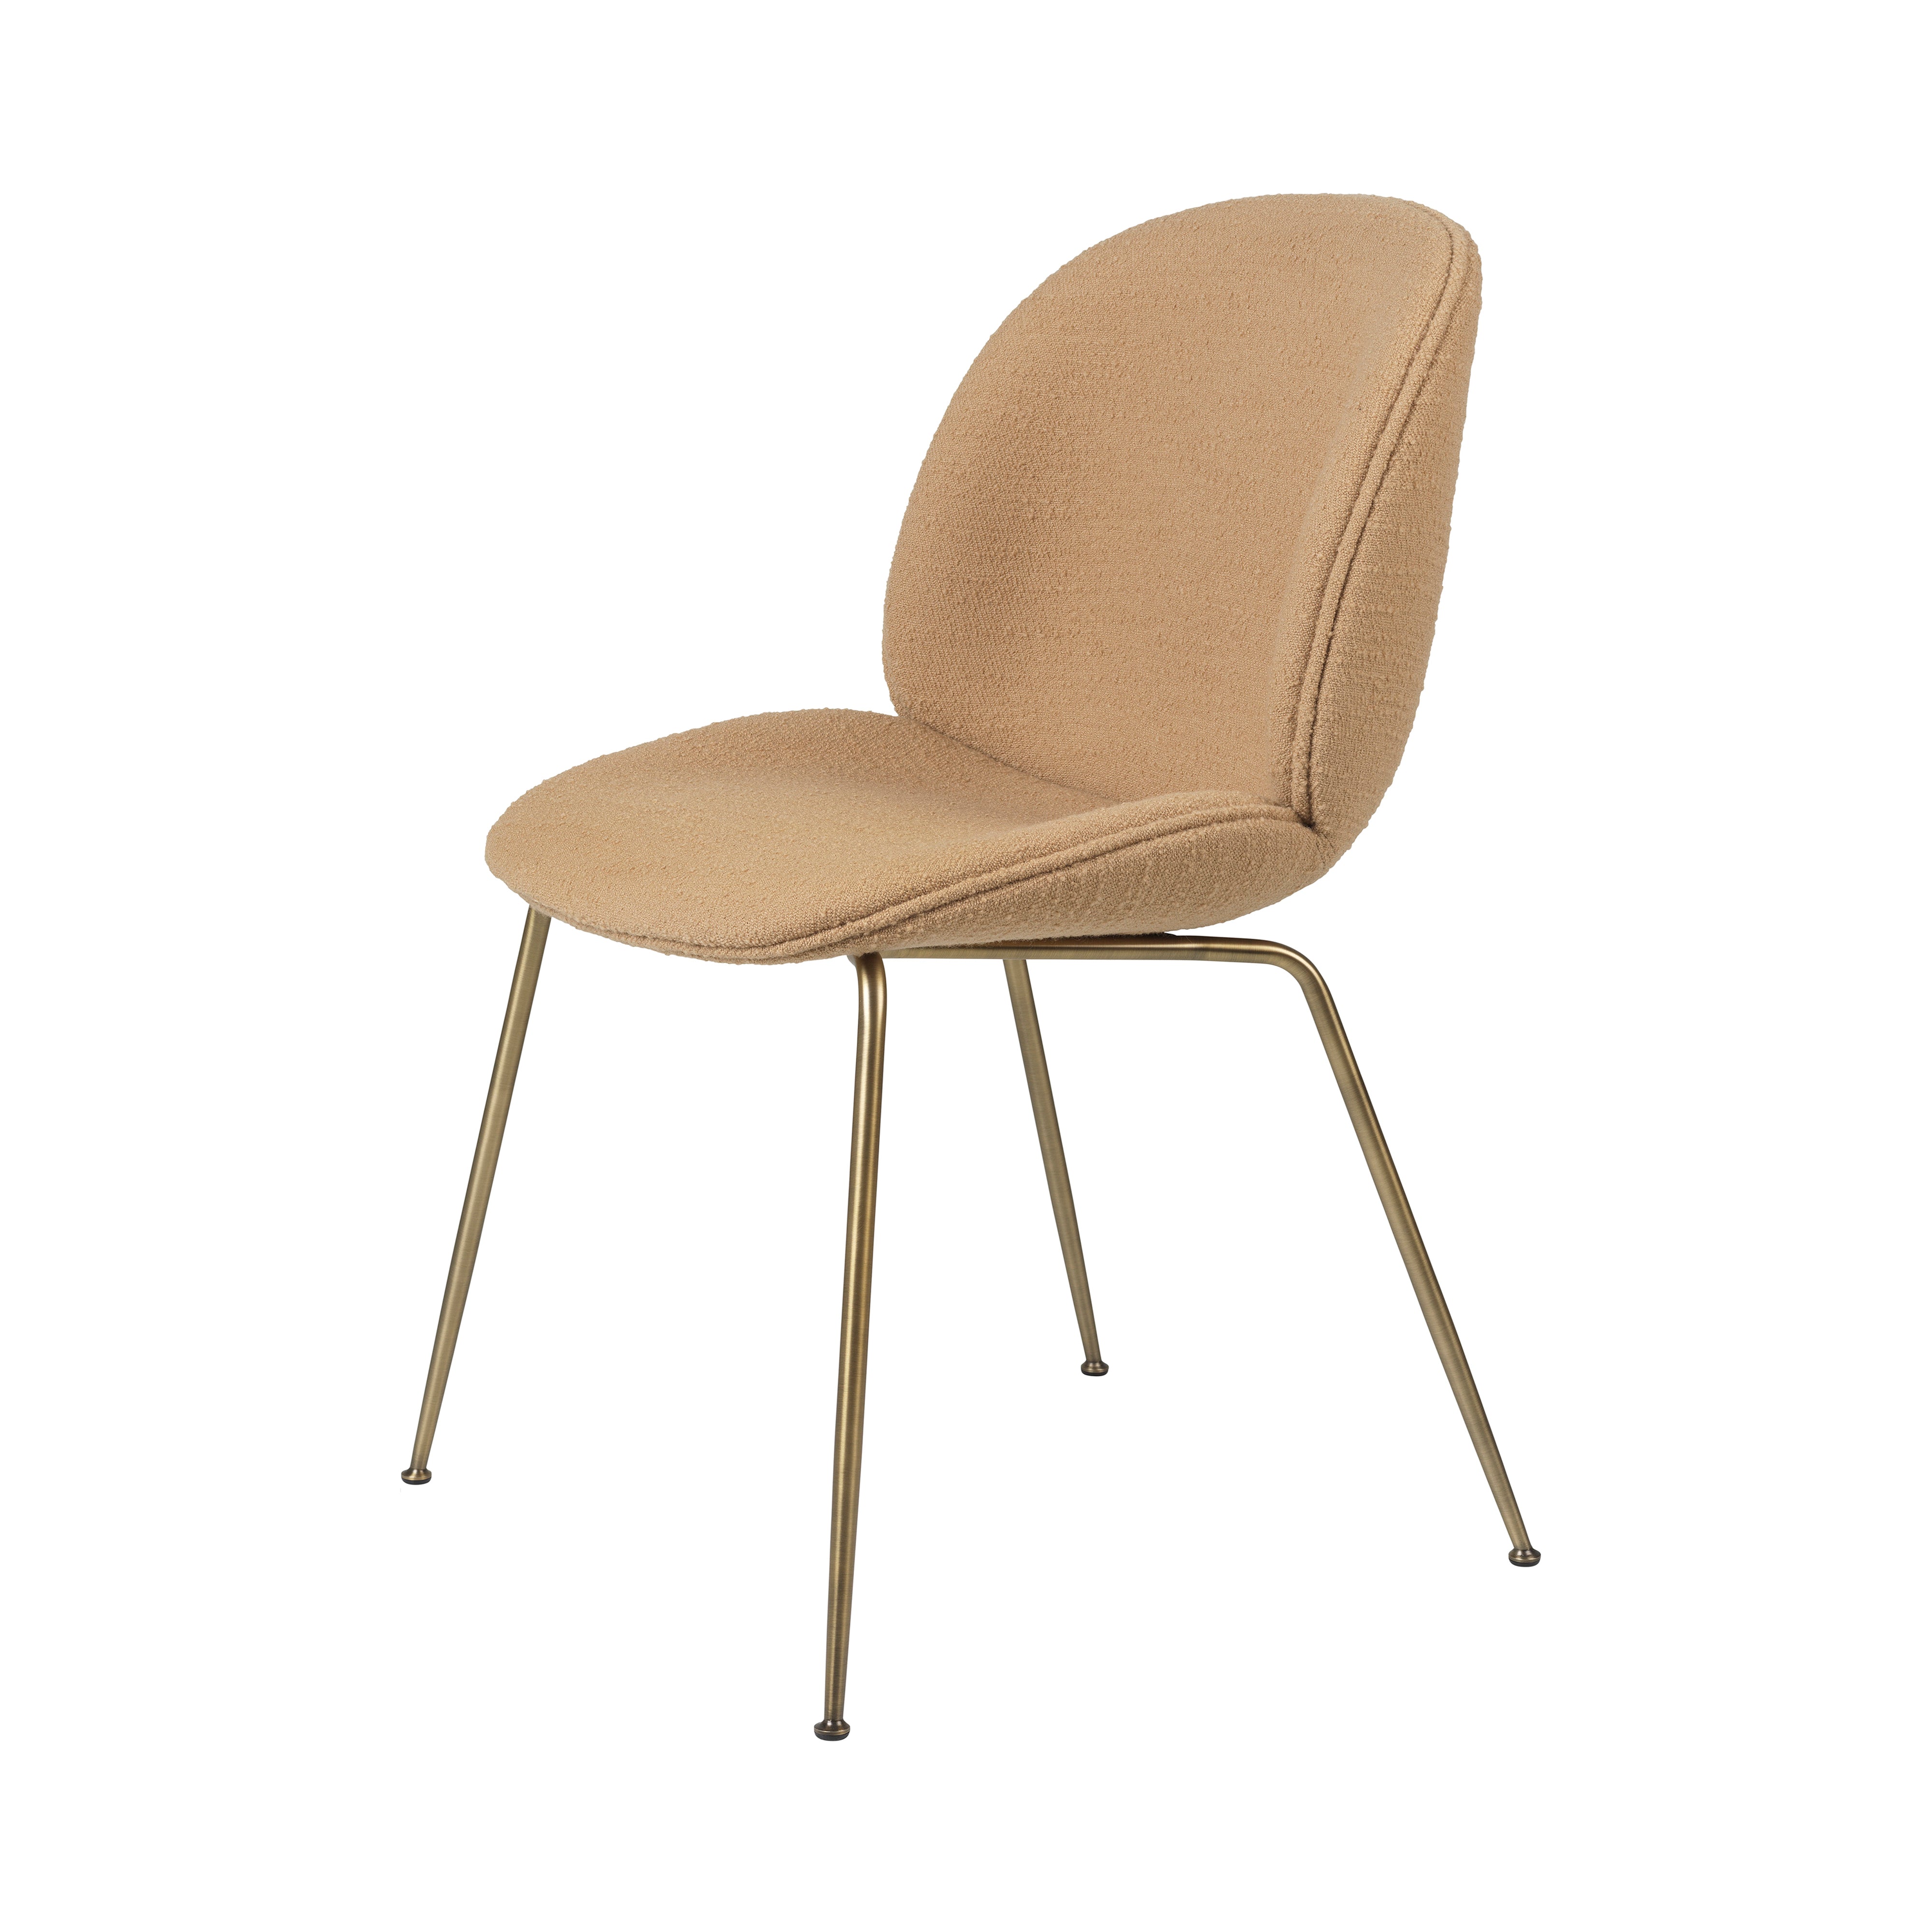 Beetle Dining Chair: Conic Base + Full Upholstery + Antique Brass